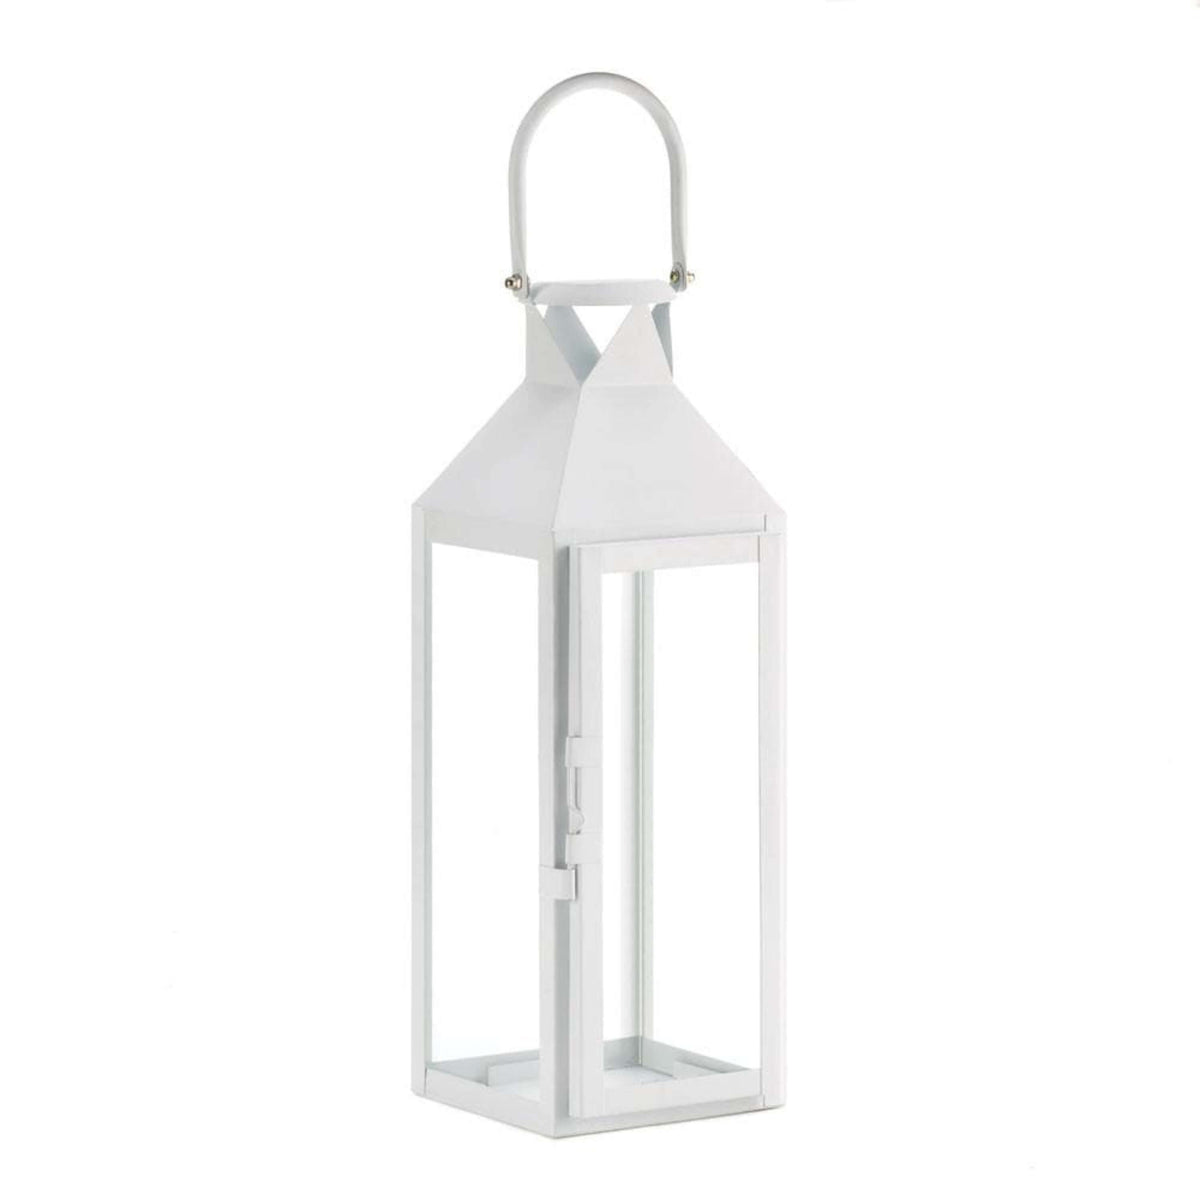 White Manhatten Candle Lantern - The House of Awareness